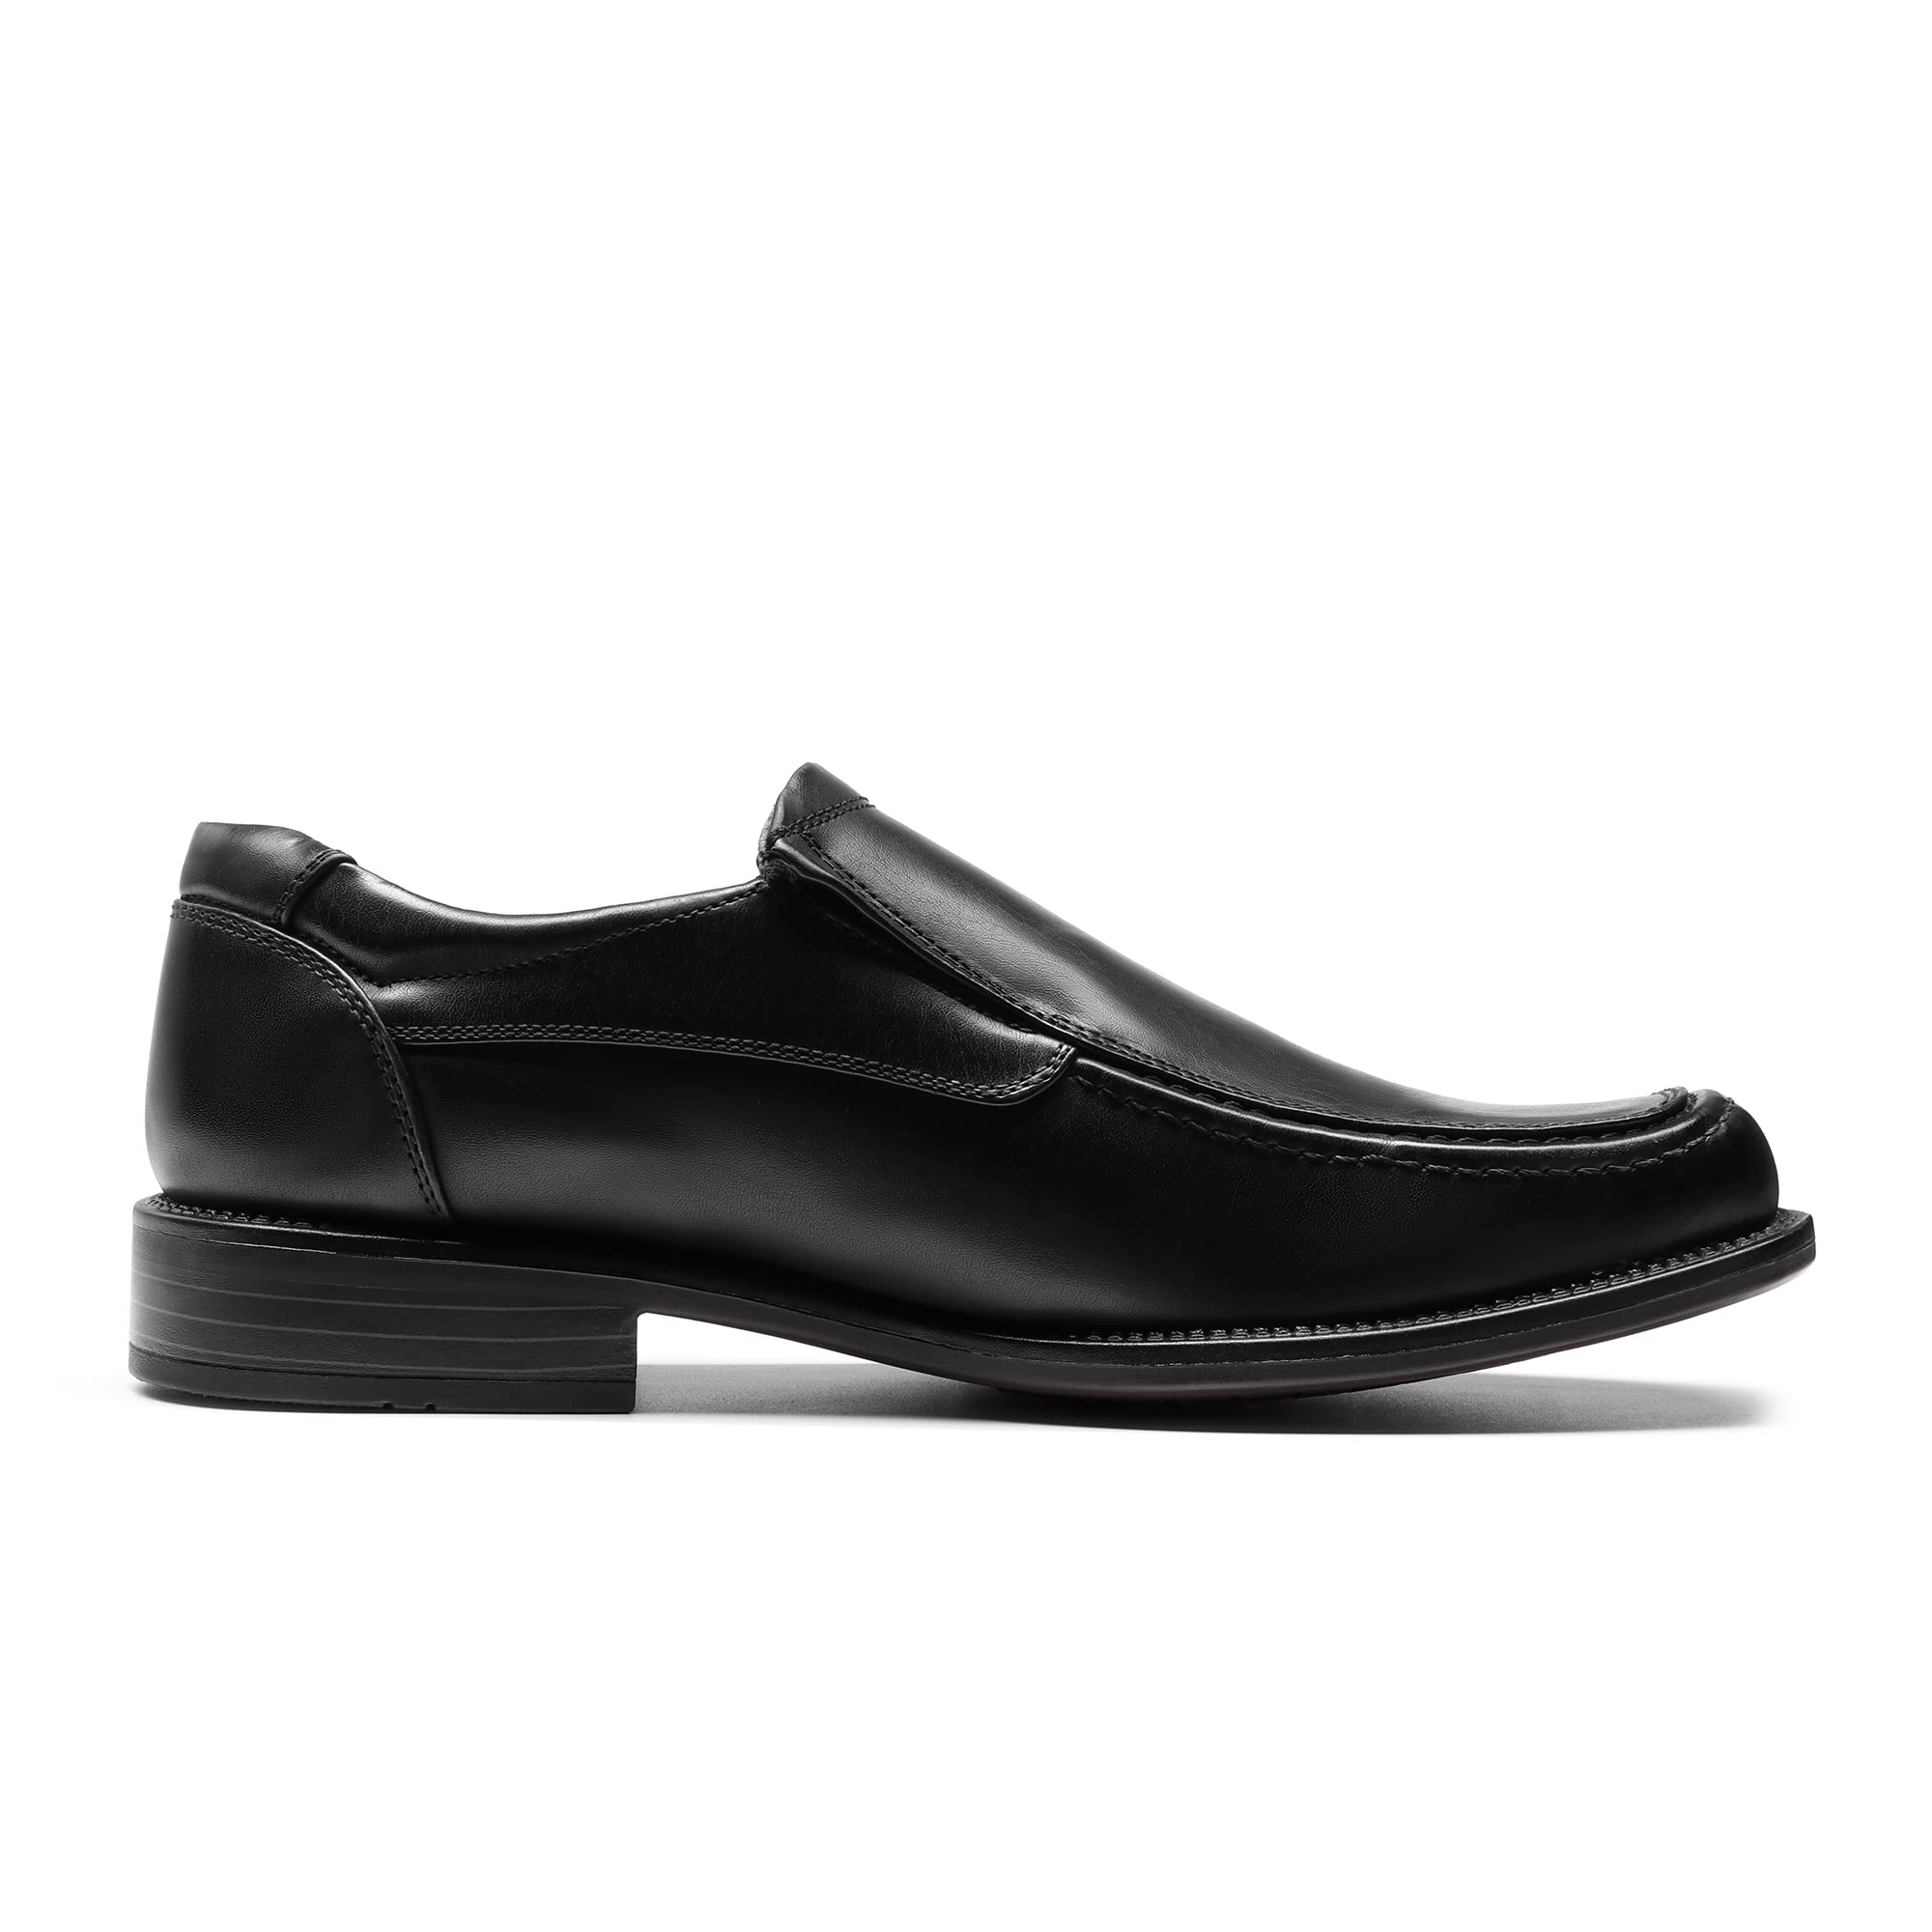 Bruno Marc Men's Goldman-02 Black Slip on Leather Lined Square Toe Dress Loafers Shoes for Casual Weekend Formal Work - 13 M US